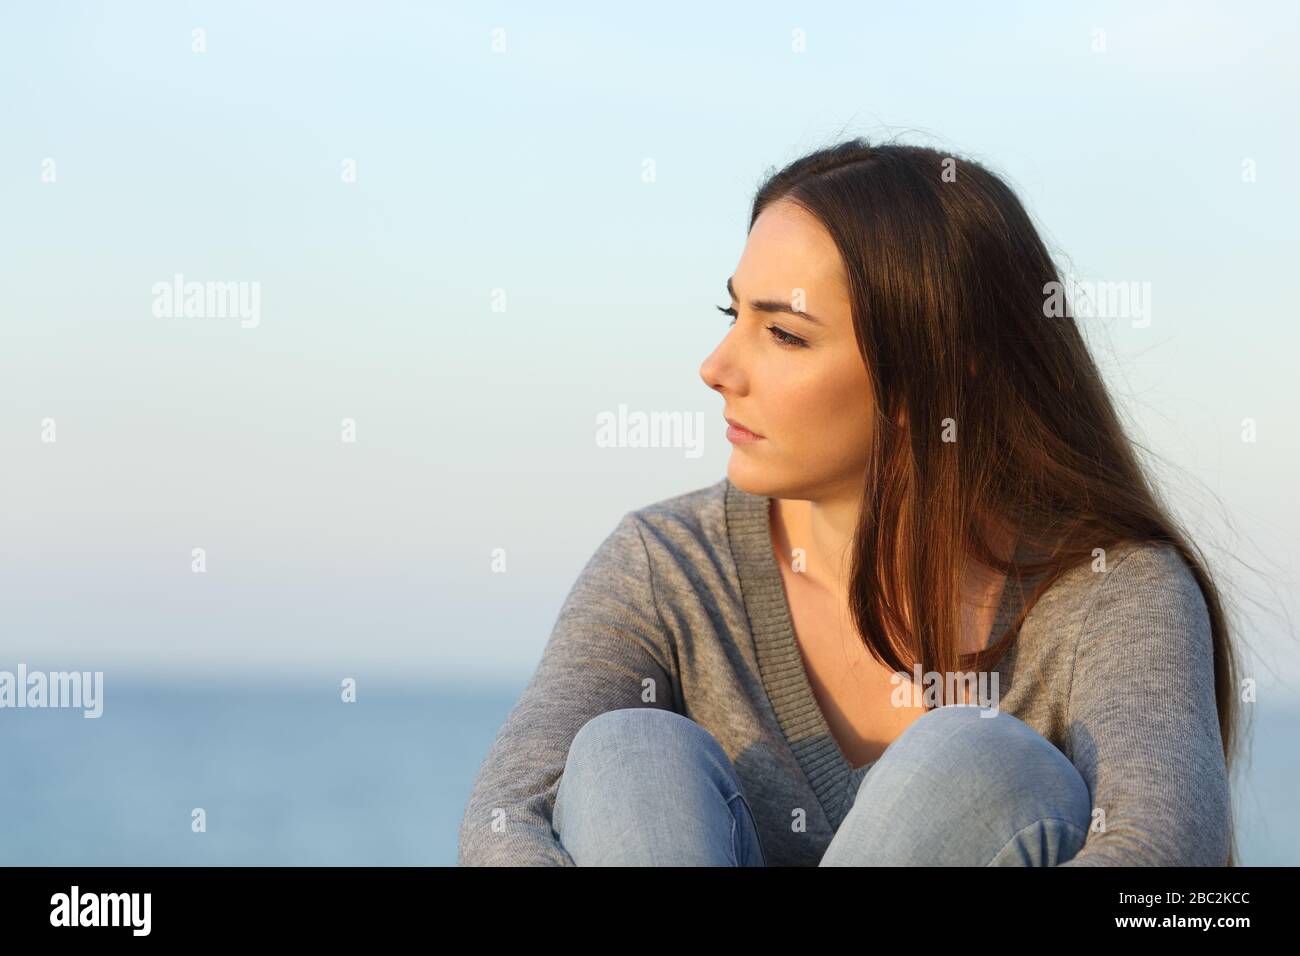 Pensive melancholic woman looking away sitting on the beach at sunset Stock Photo